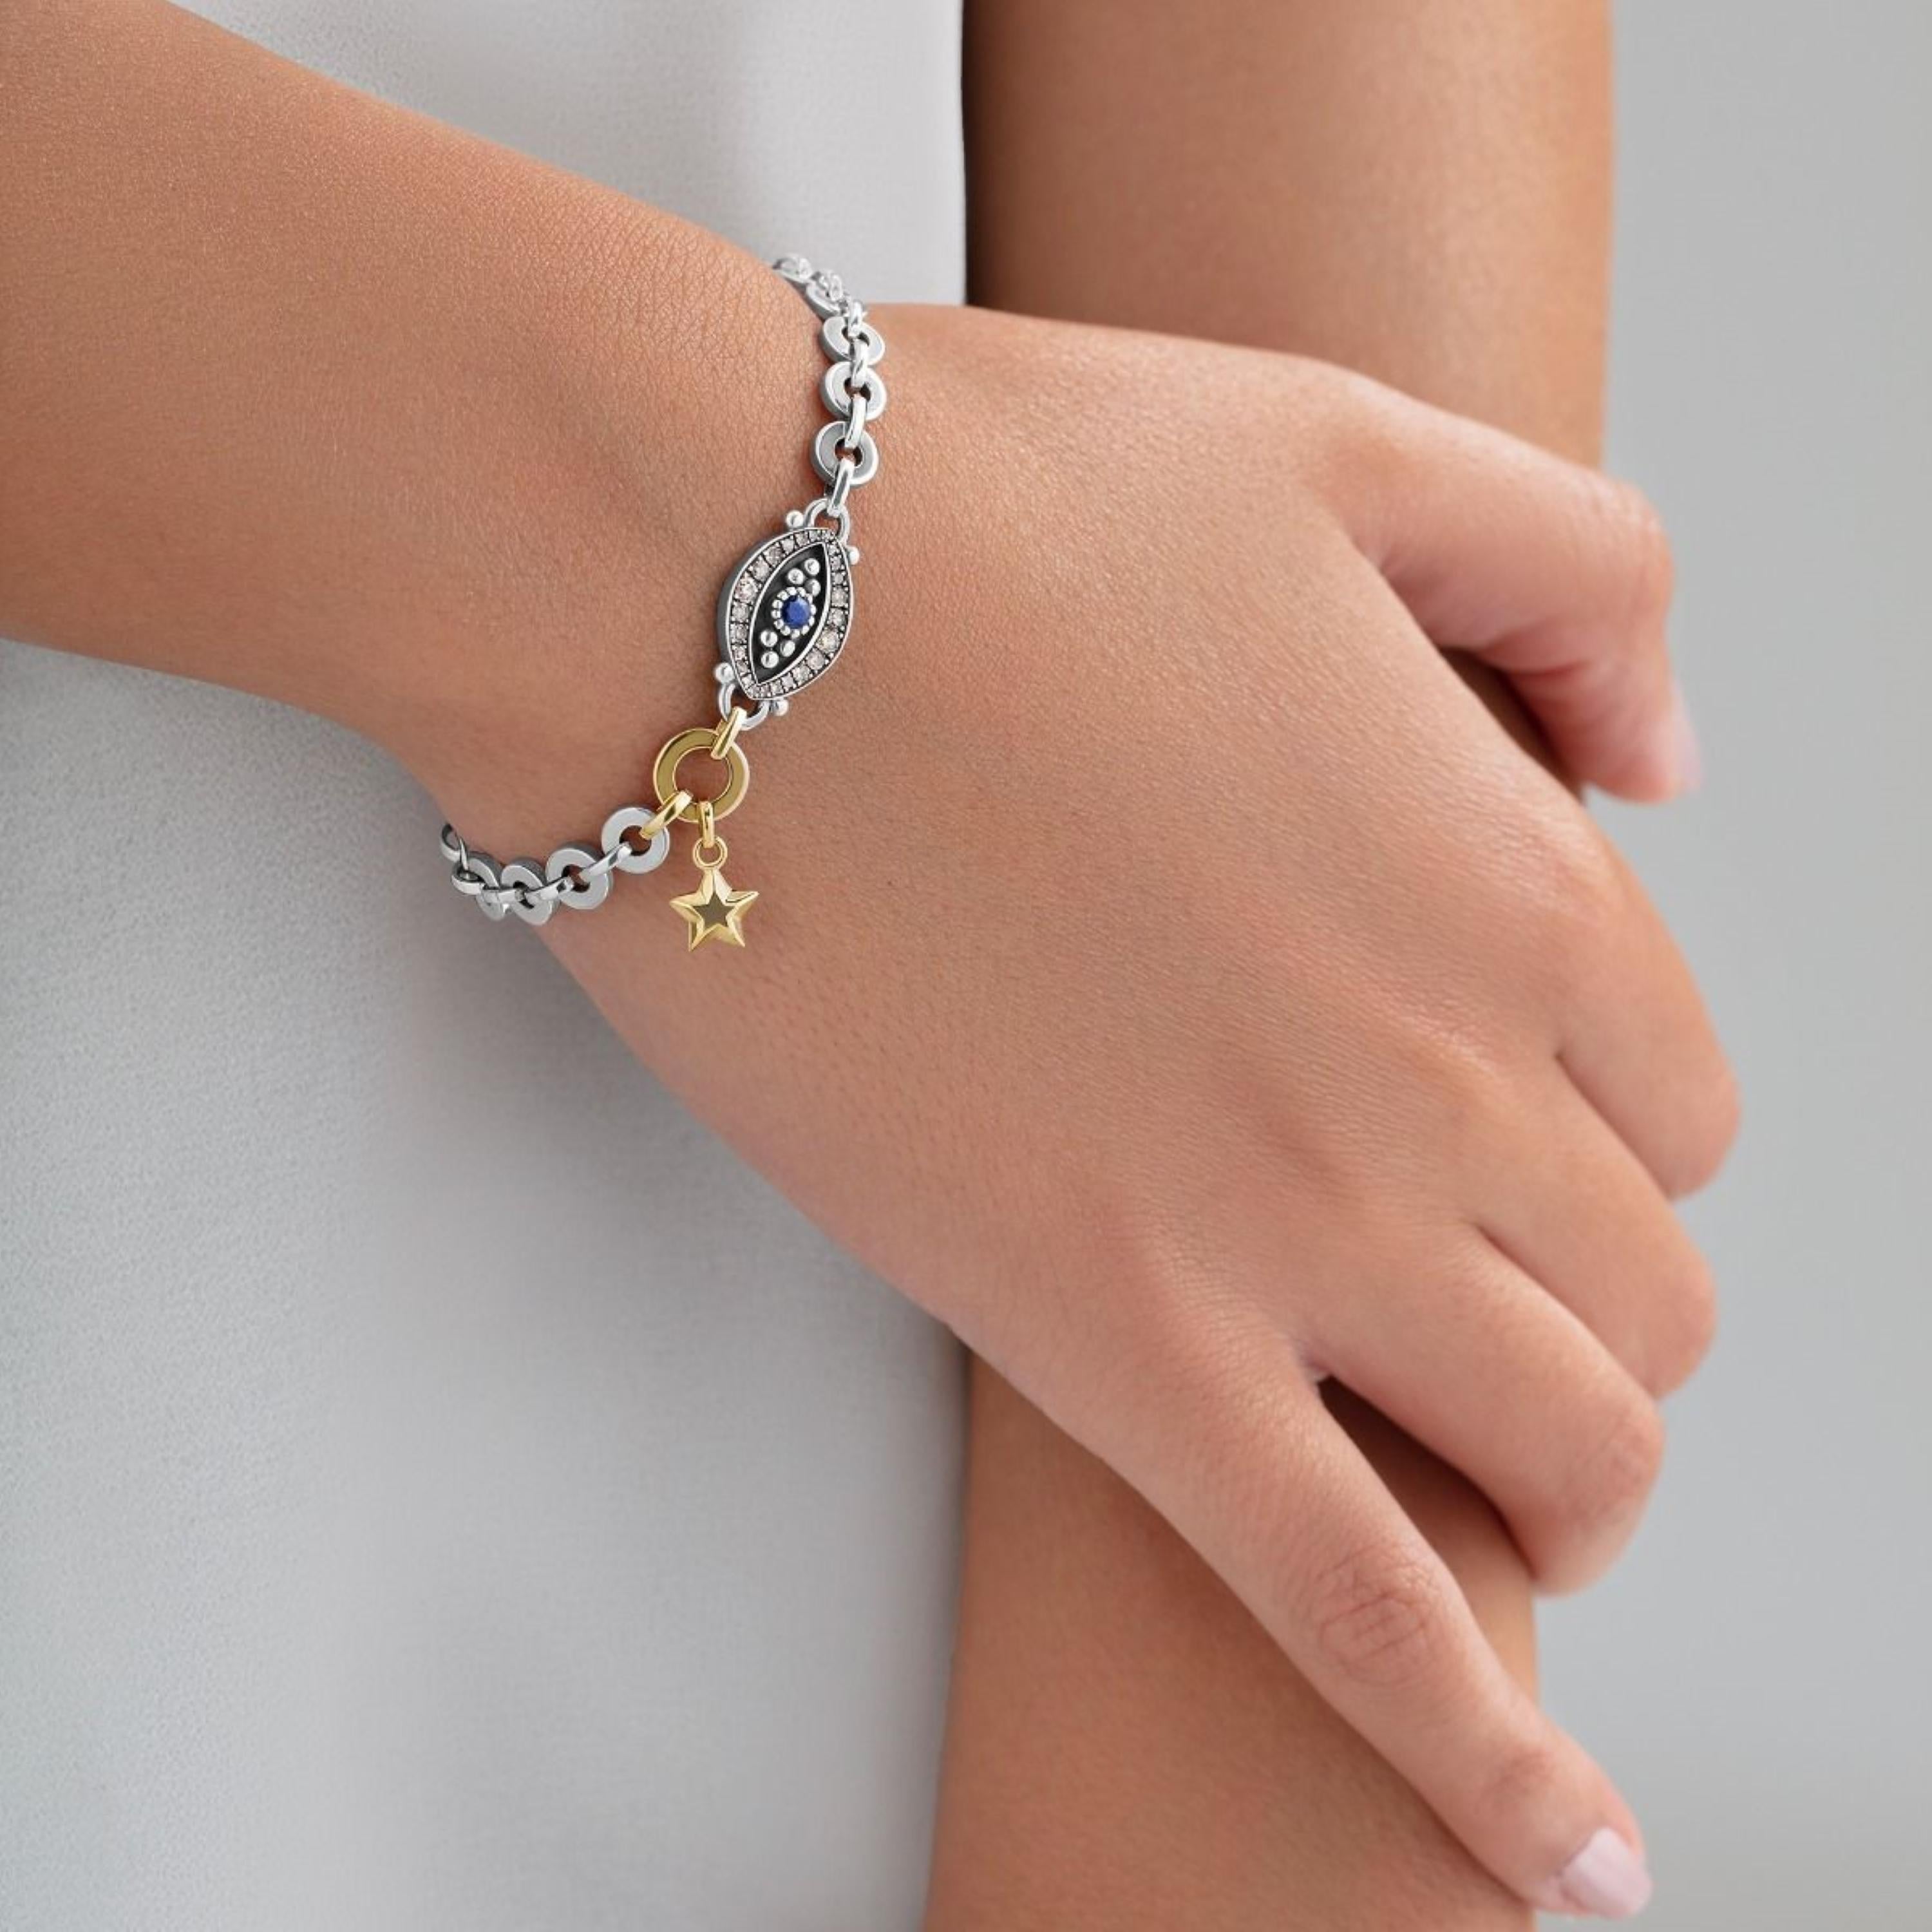 18 Karat Gold and Sterling Silver Eye & Star Bracelet, set with precious stones. 

Featuring a suspended gold star, this 18 Karat Gold and Sterling Silver bracelet carries an eye set with 0.33 carat Champagne Diamonds and 0.20 carat